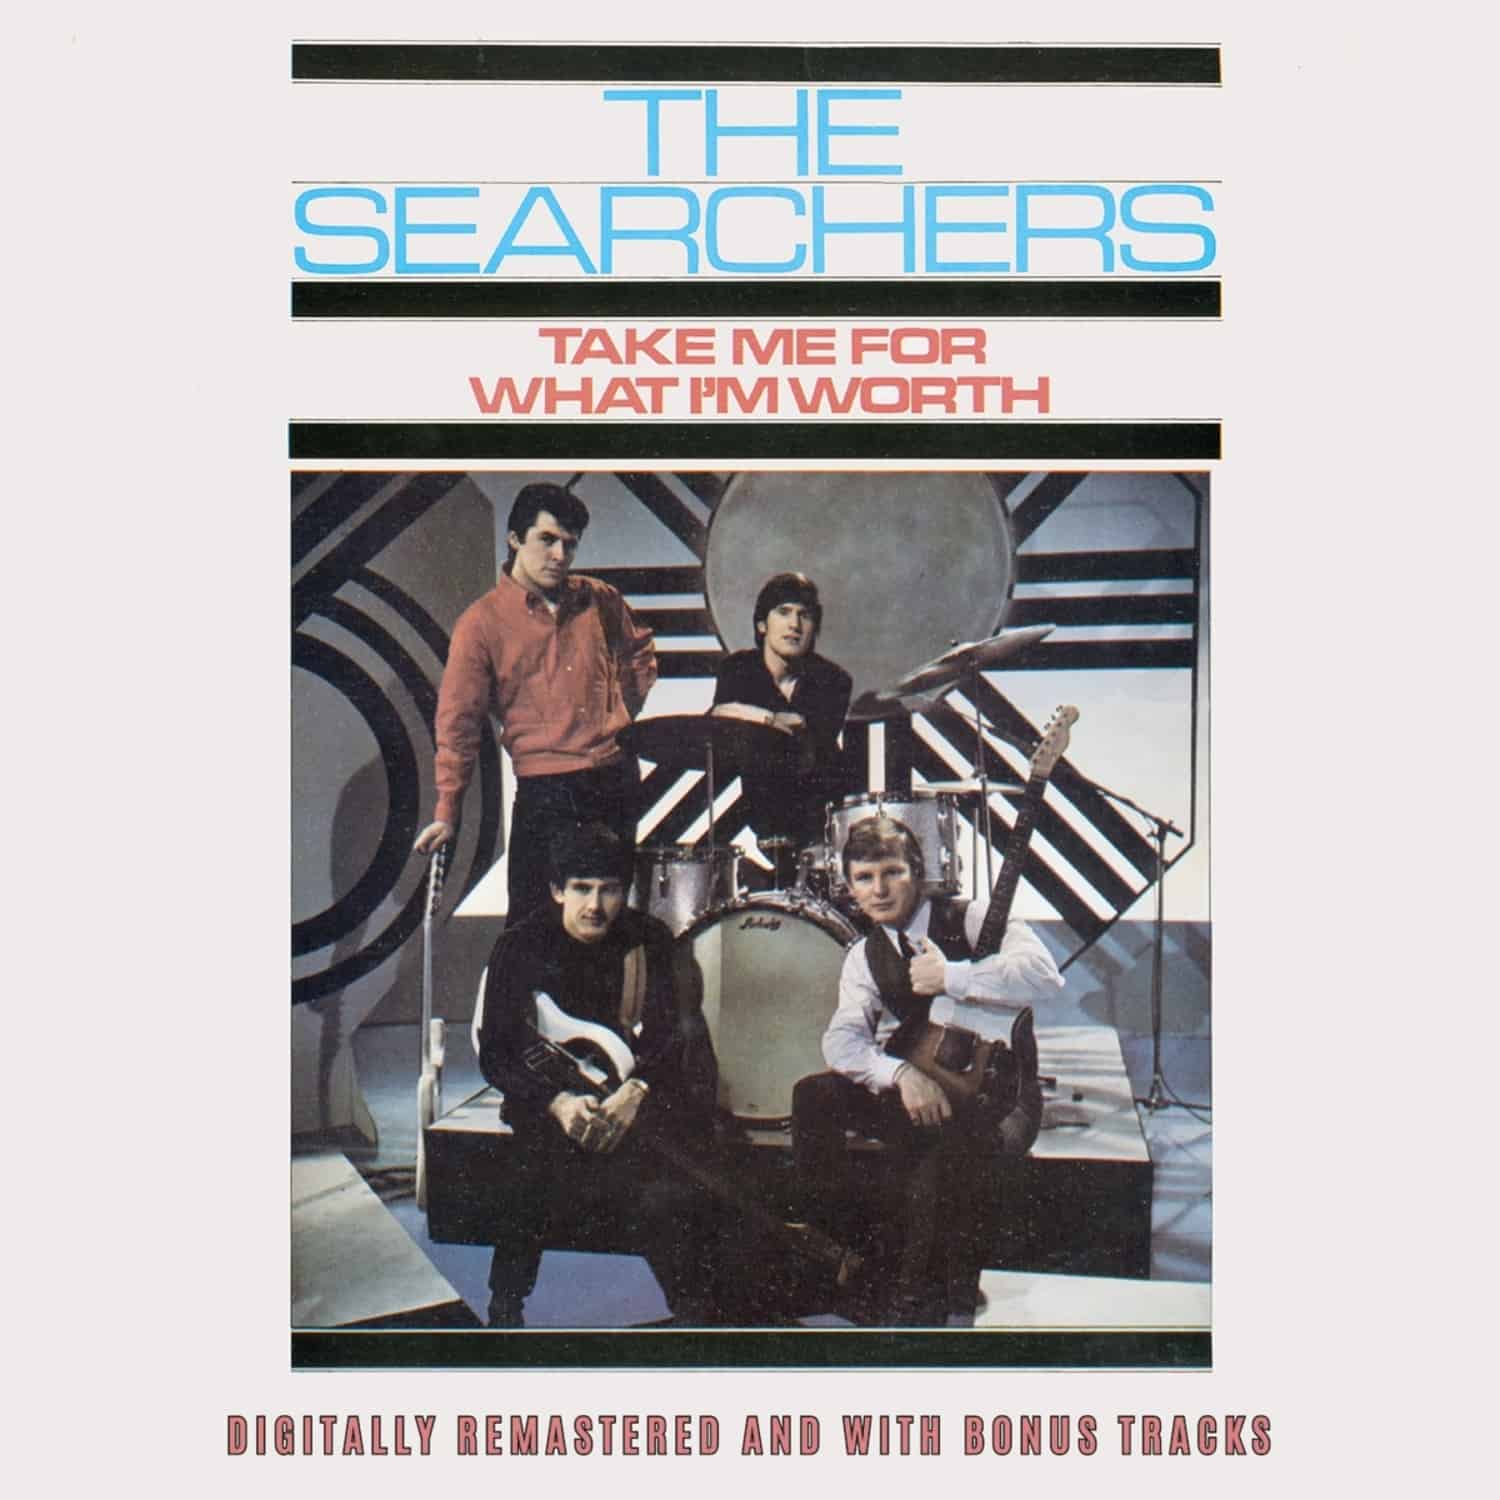 The Searchers - TAKE ME FOR WHAT I M WORTH 